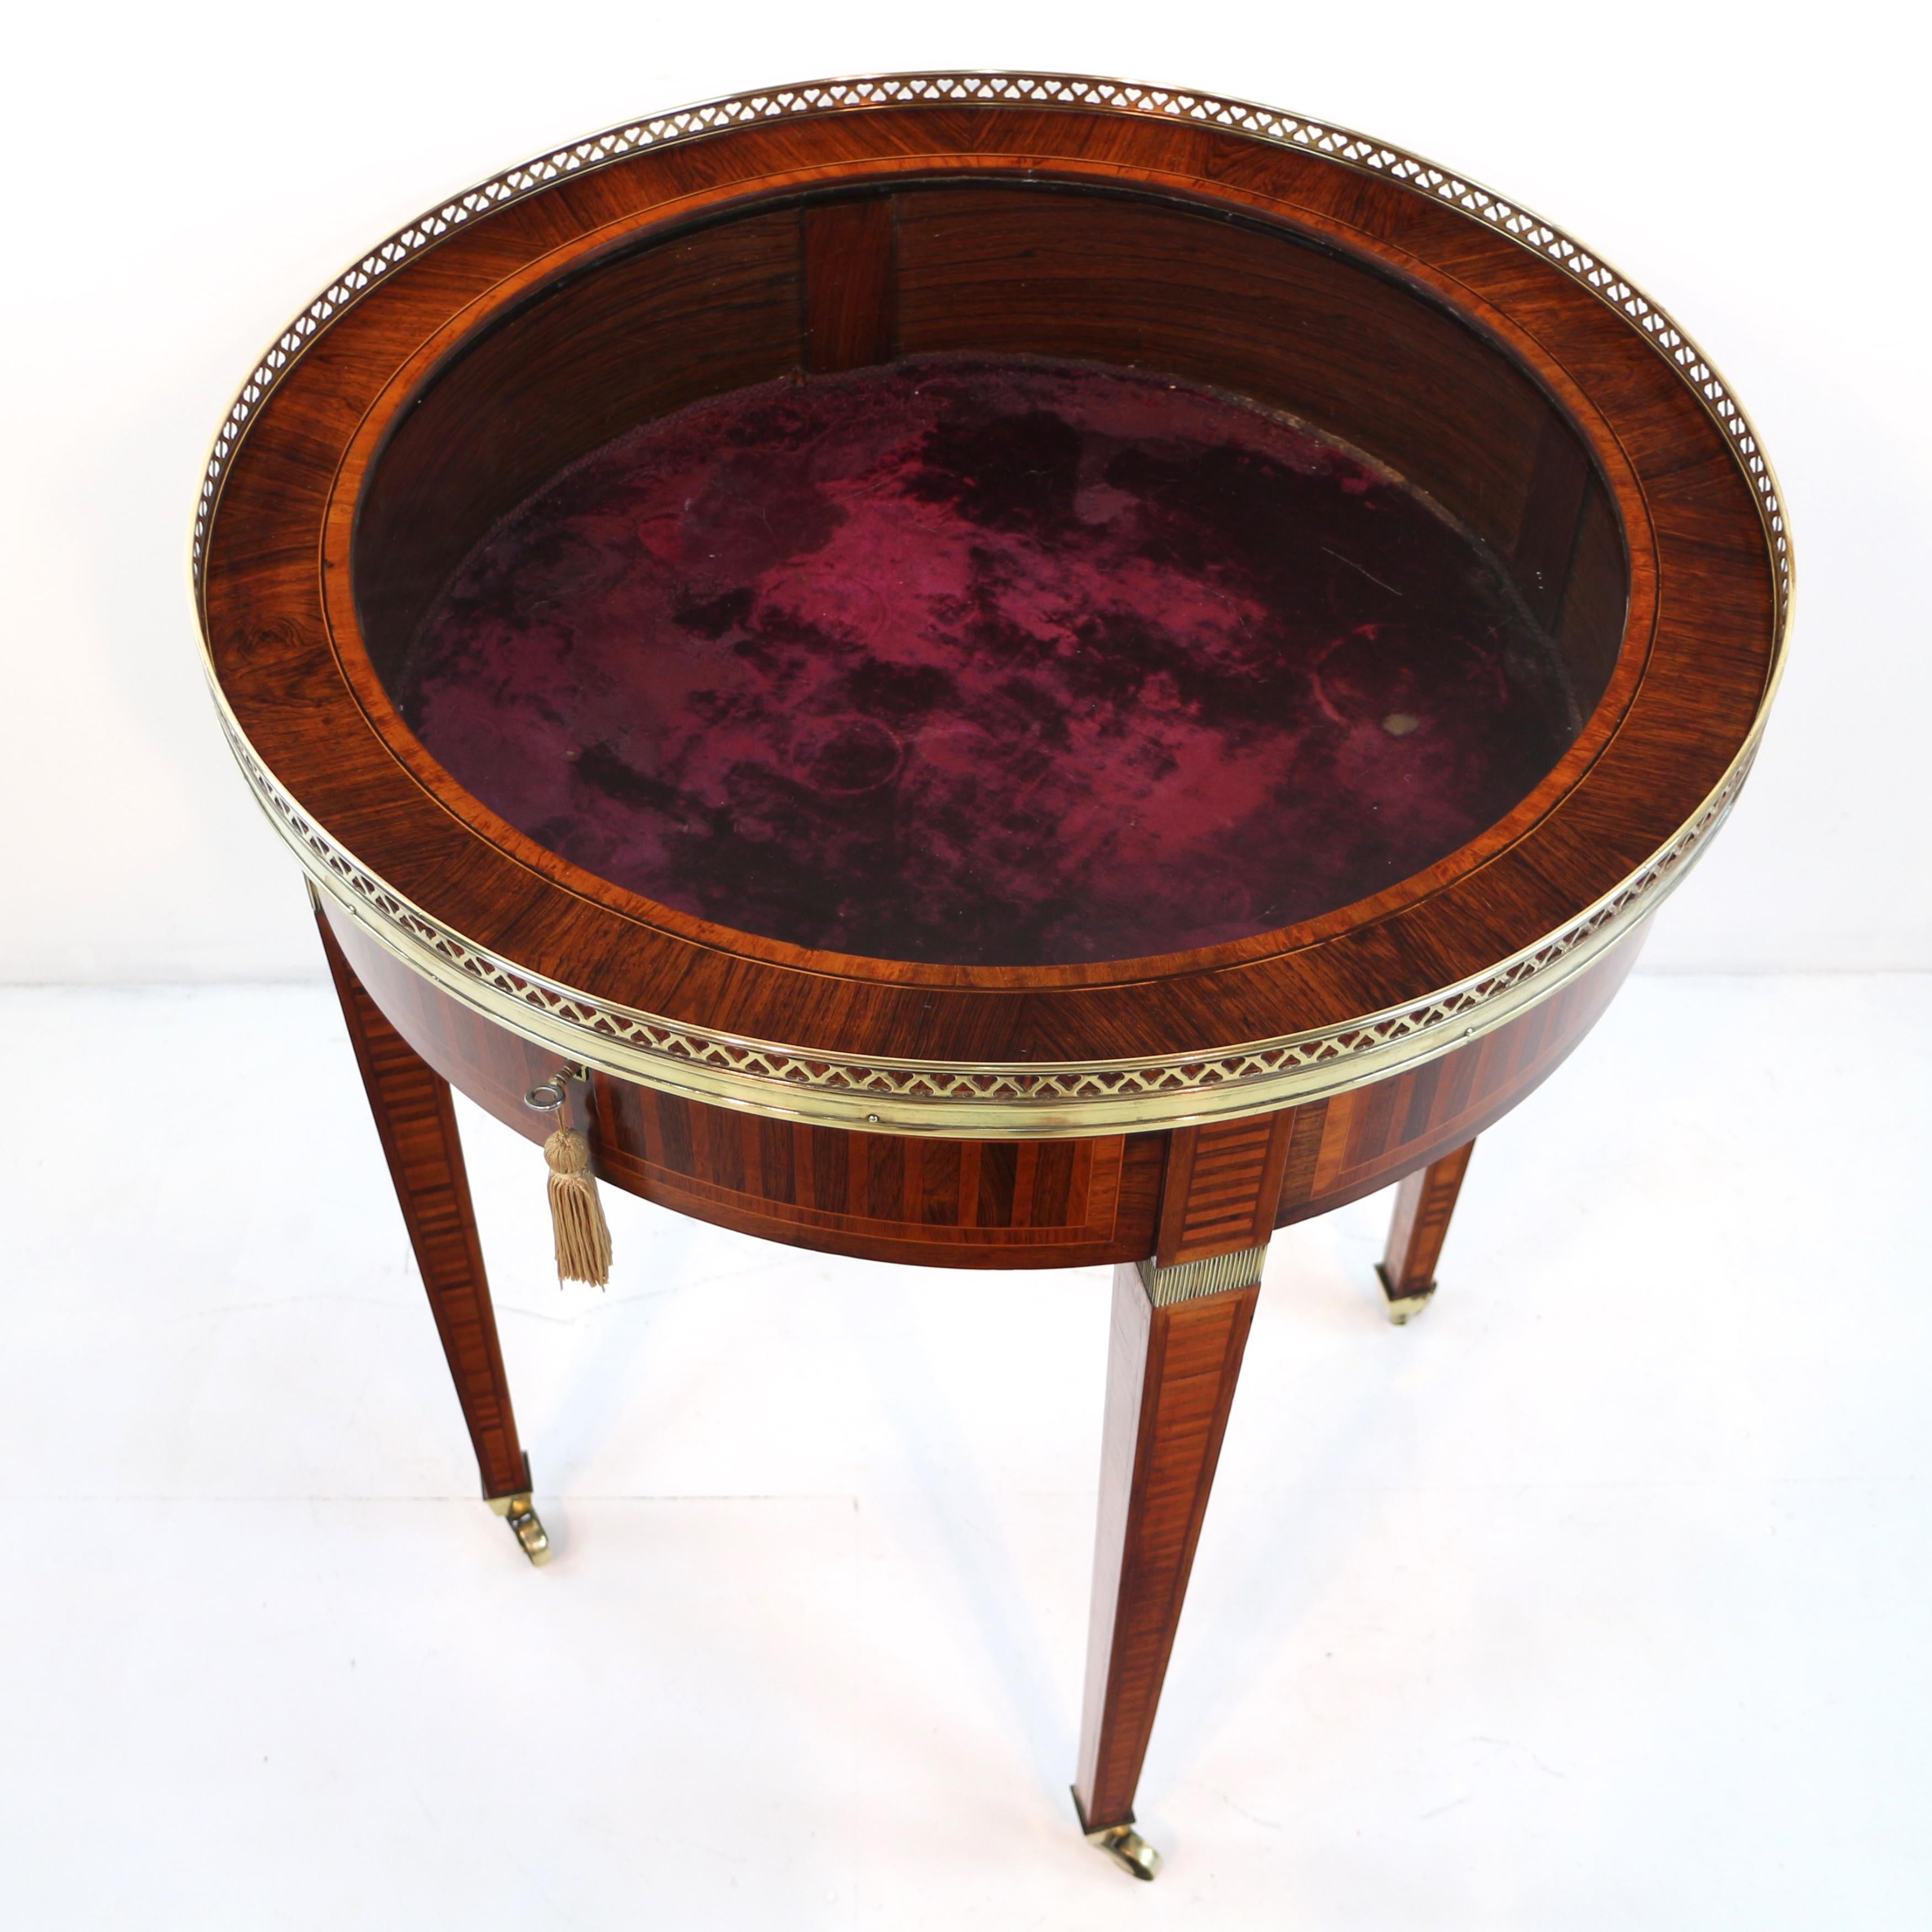 Antique English Victorian Sheraton Revival Rosewood & Parquetry Bijouterie Table For Sale 2